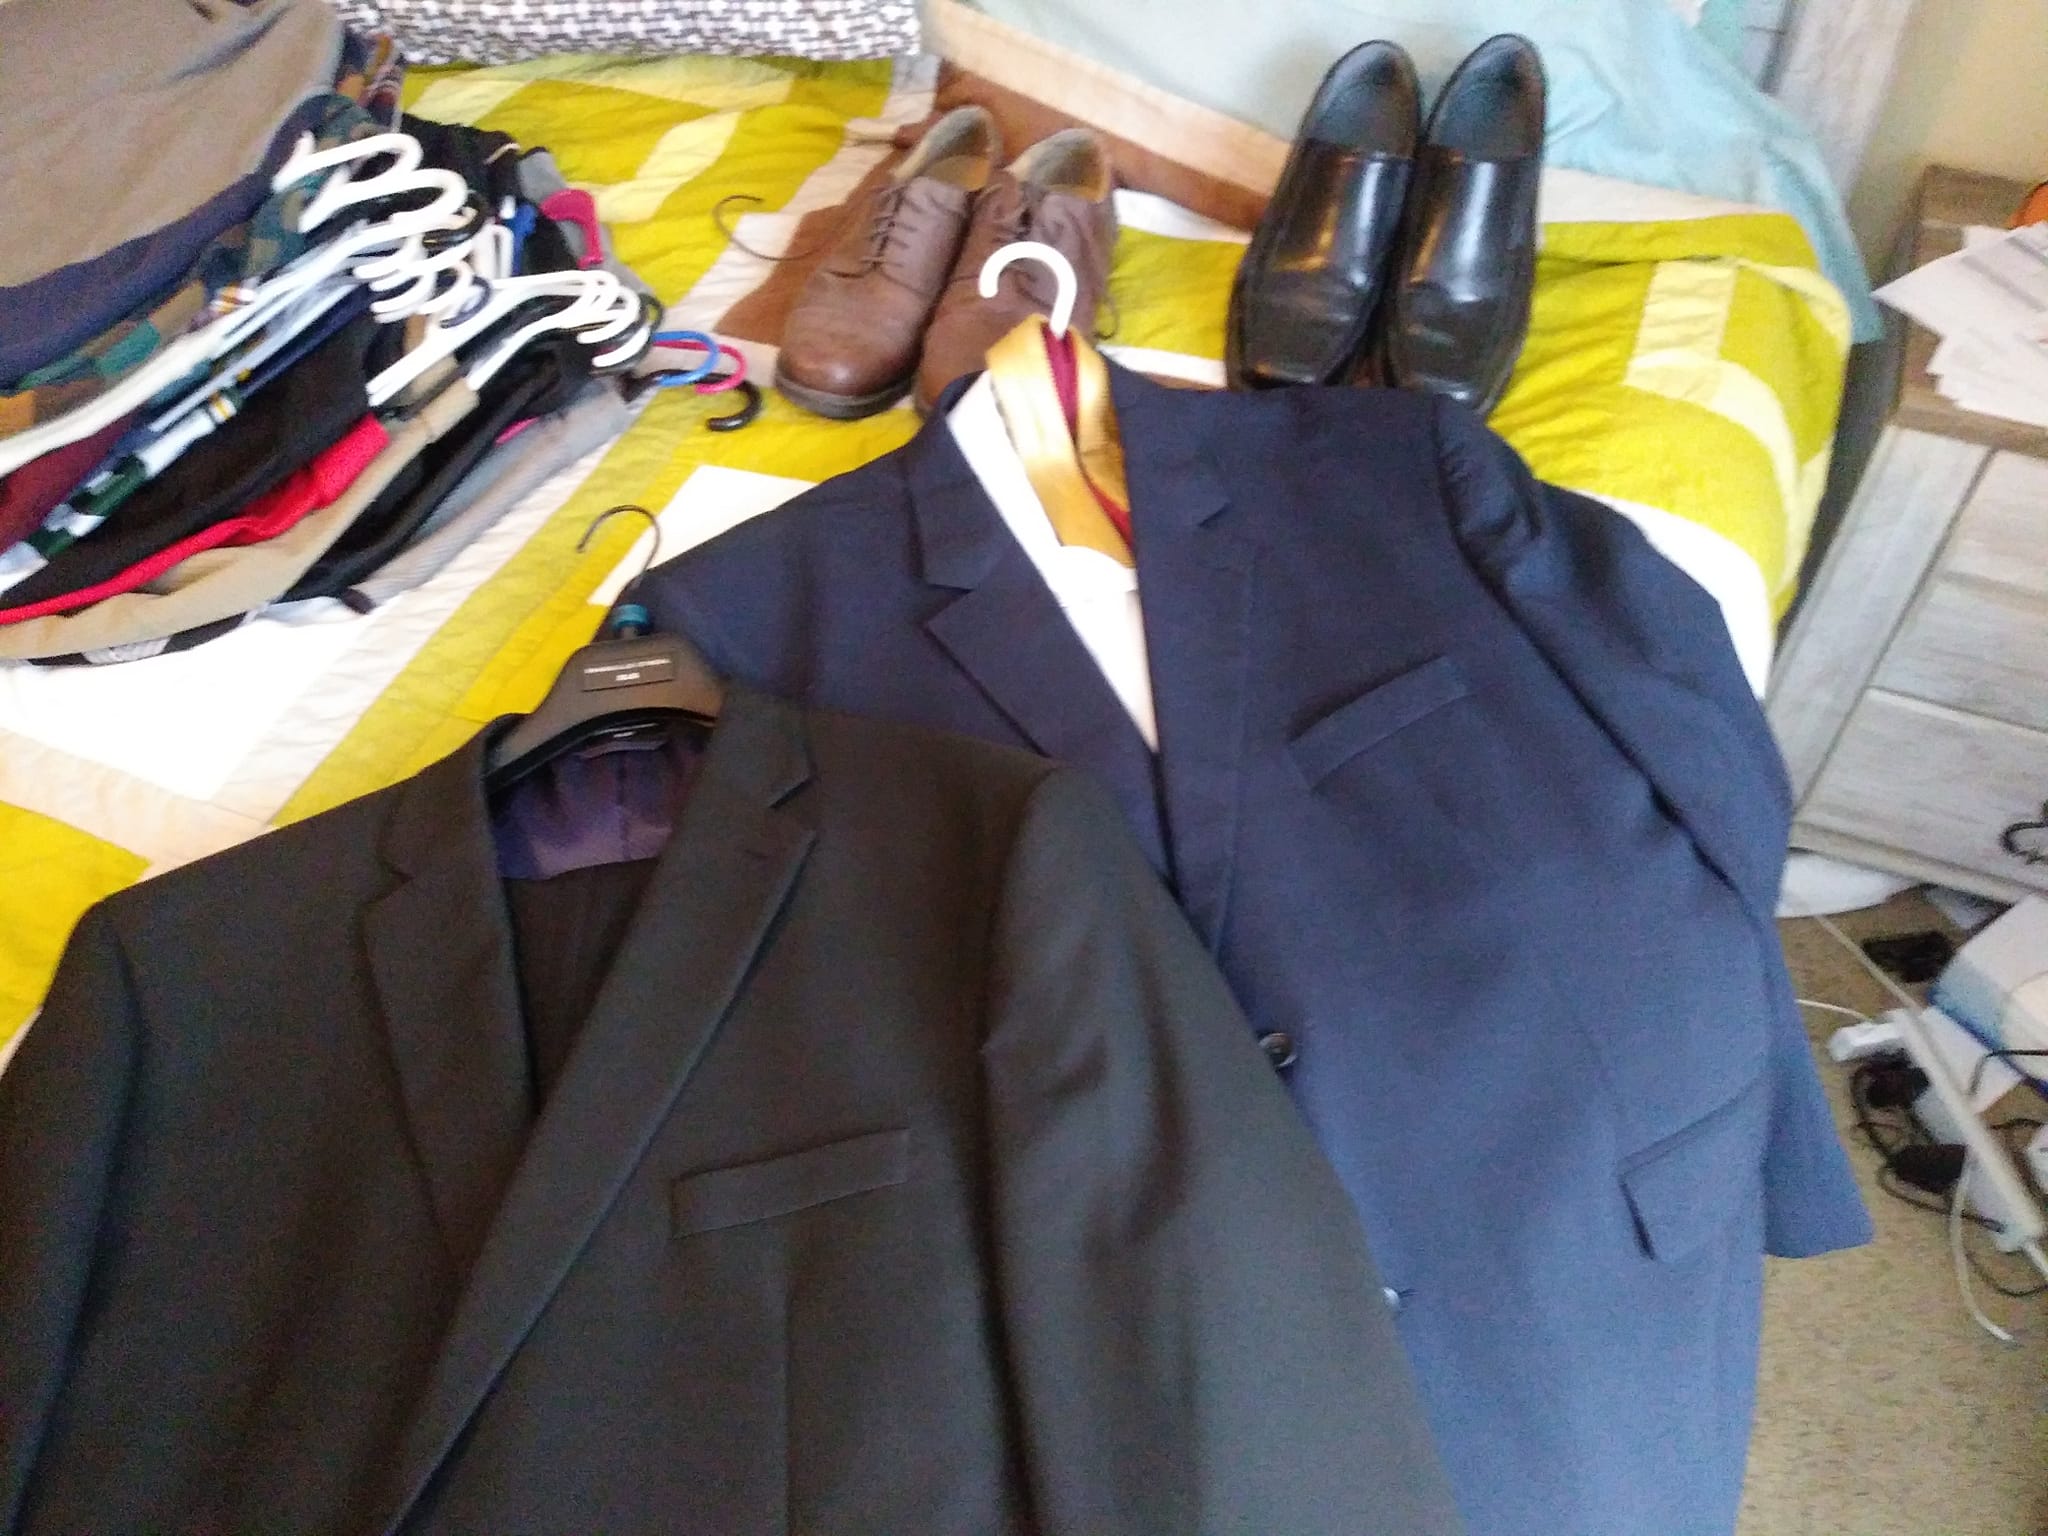 Young Men’s Formal Wear In Need As Say Yes To The Dance Collection Drive Enters Final Week